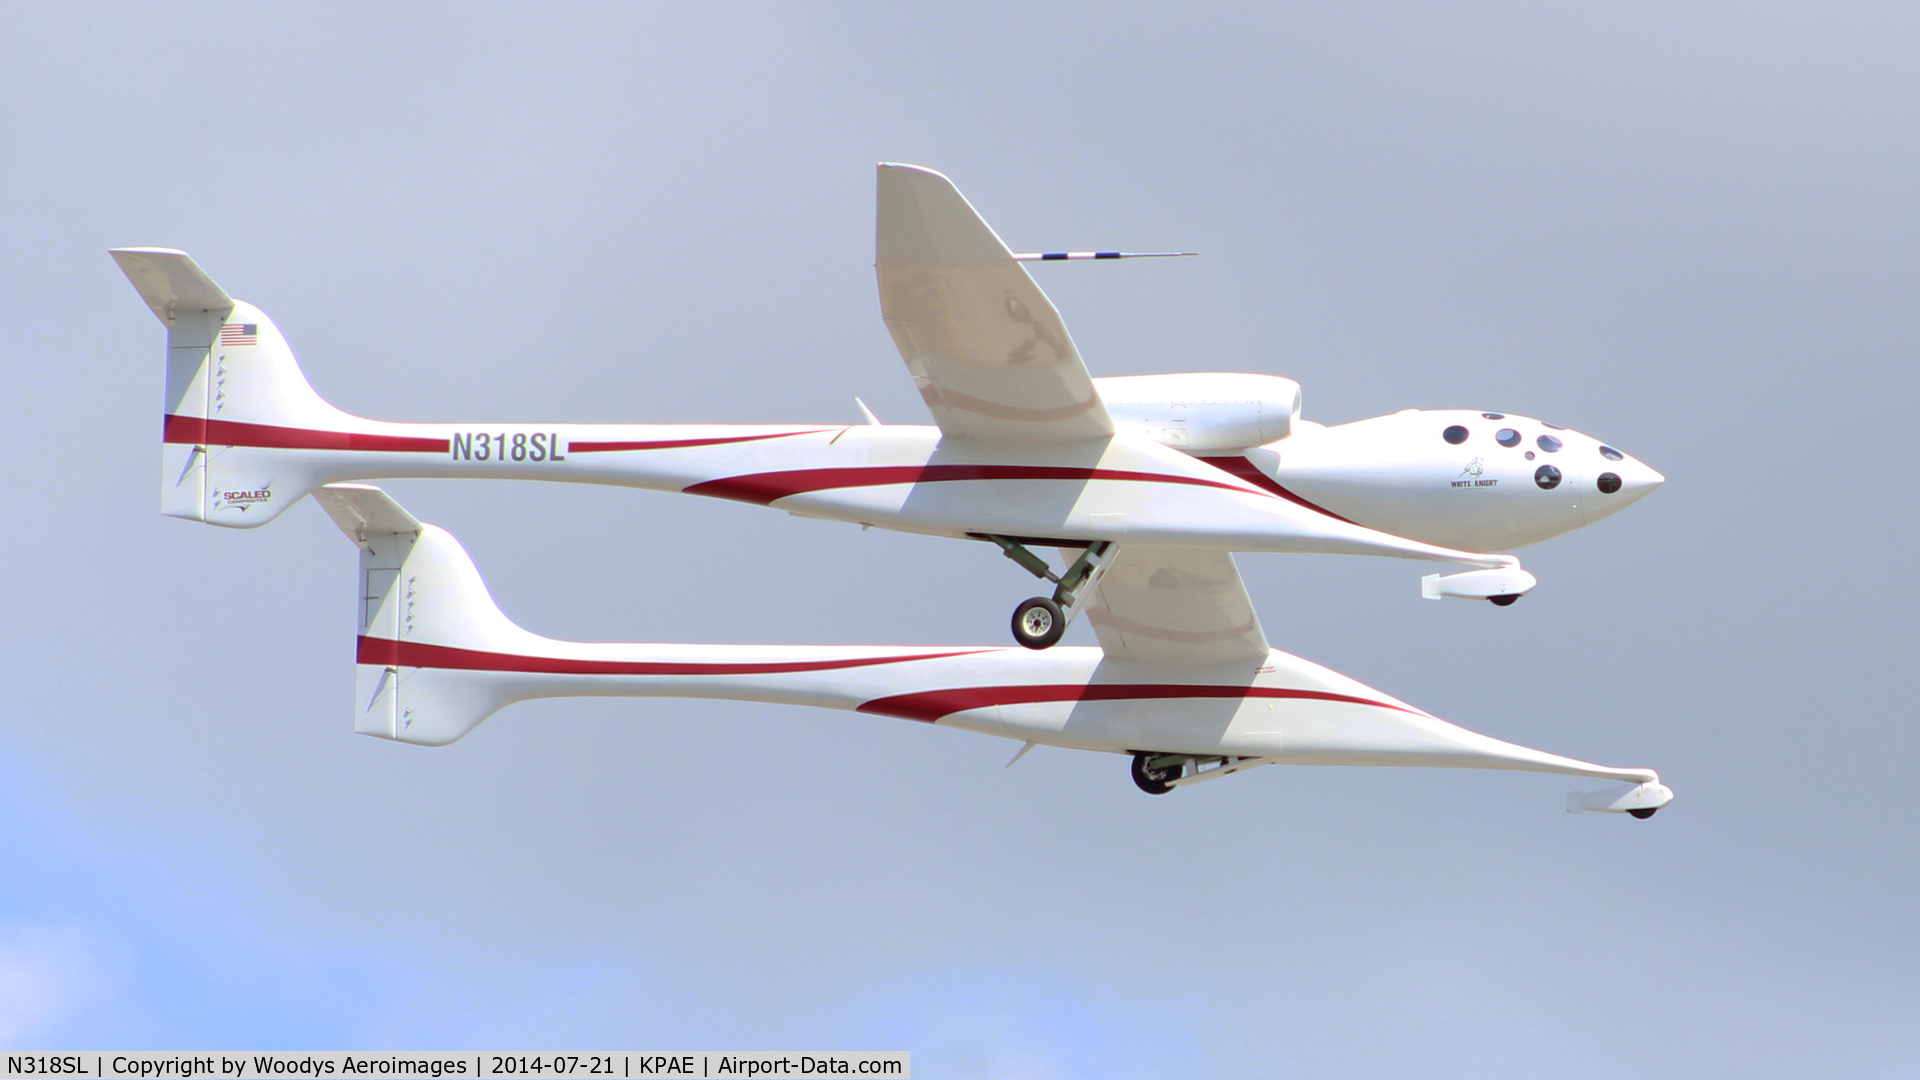 N318SL, 2002 Scaled Composites 318 C/N 001, Flying over KPAE on it's final flight